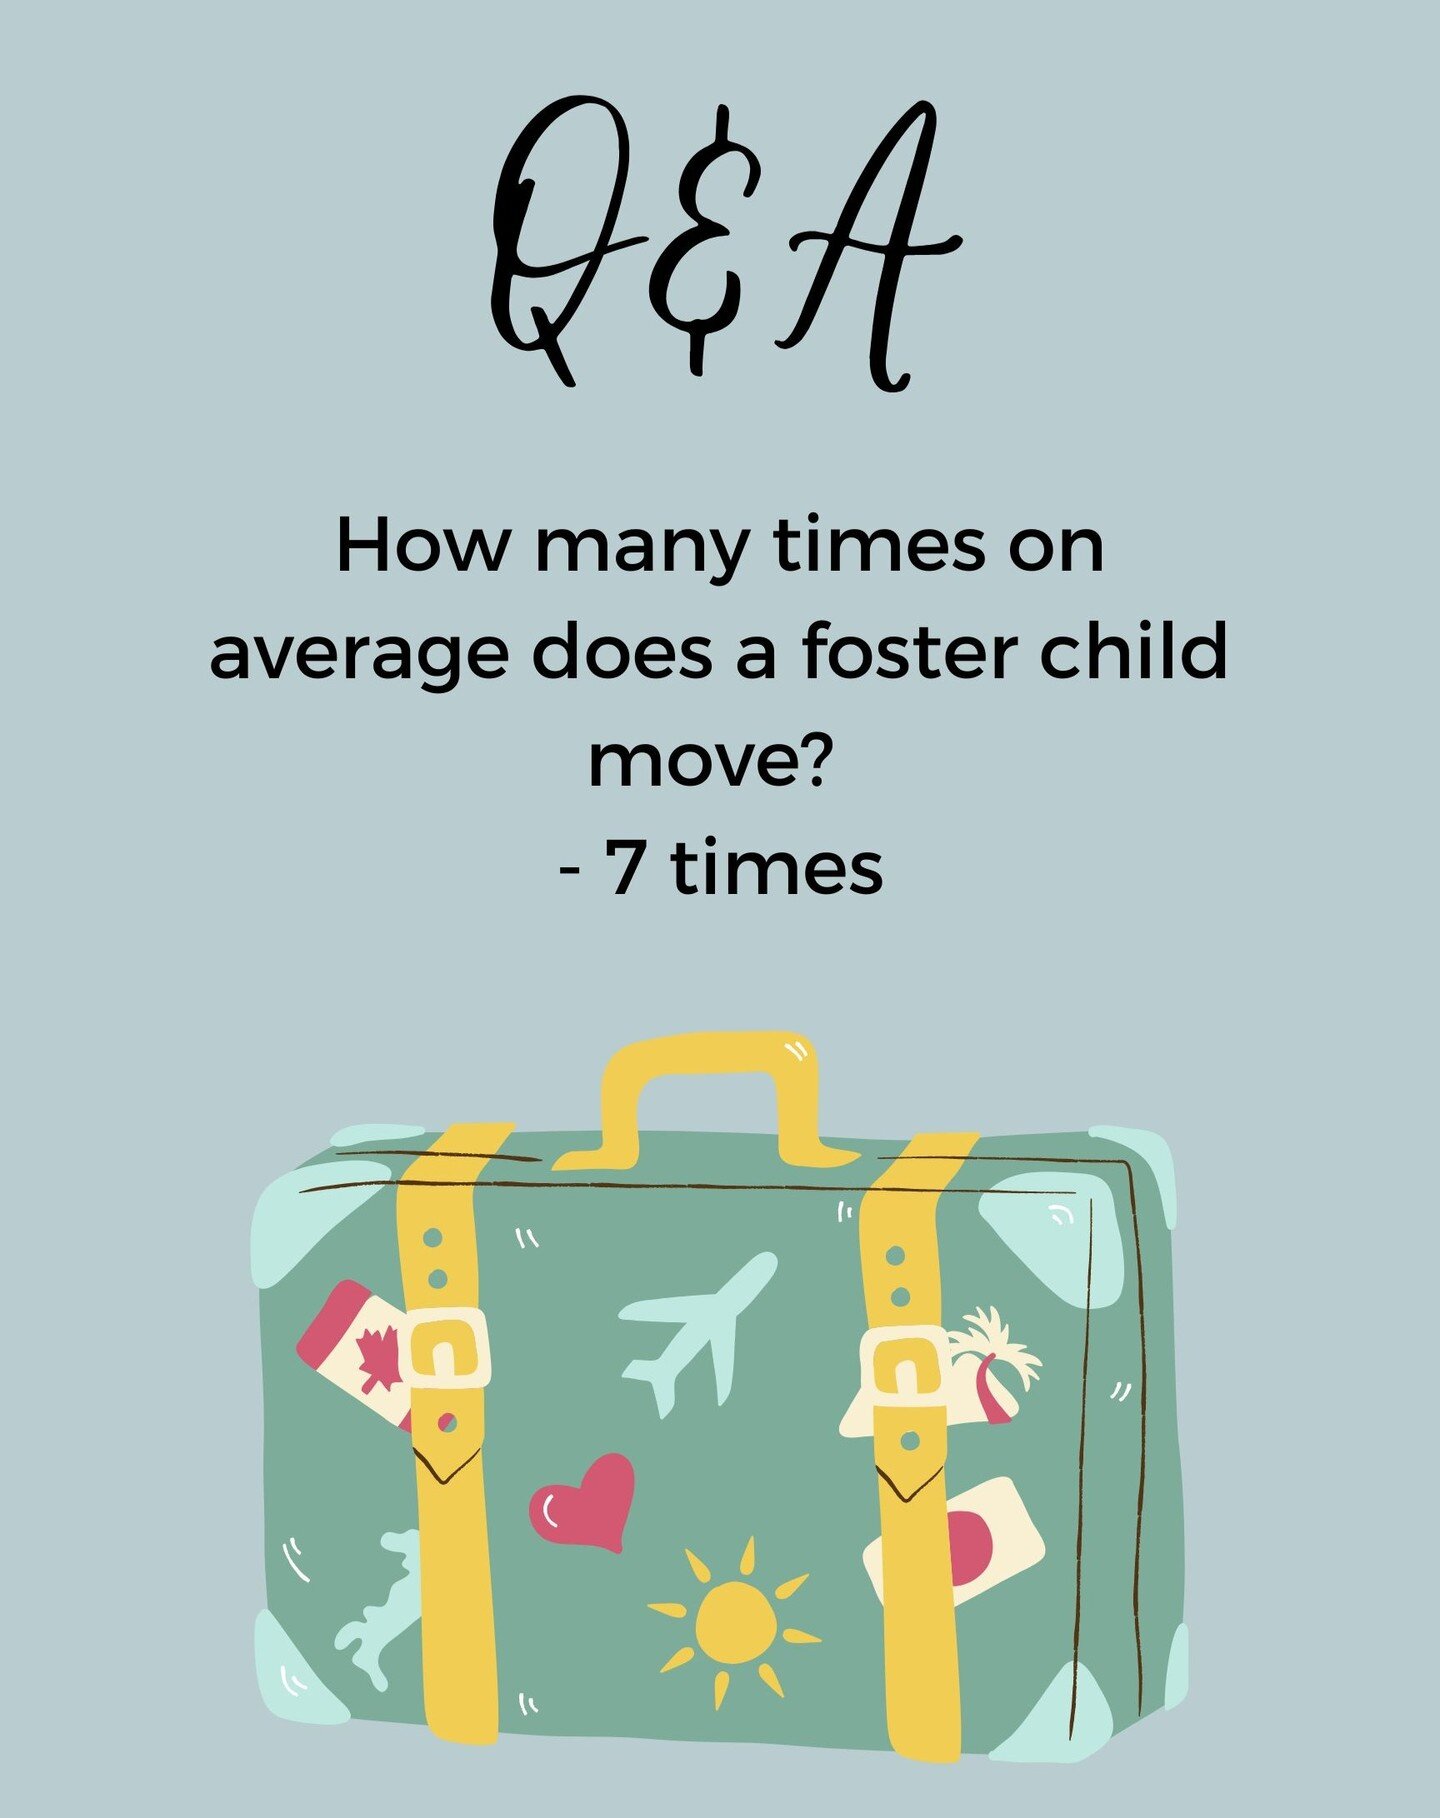 Why does this happen? 
In reality, most foster families are not well-prepared to care for these children, so they move often. 

#fostercare #fosterchildren #children #health #mentalhealth #fosterhome